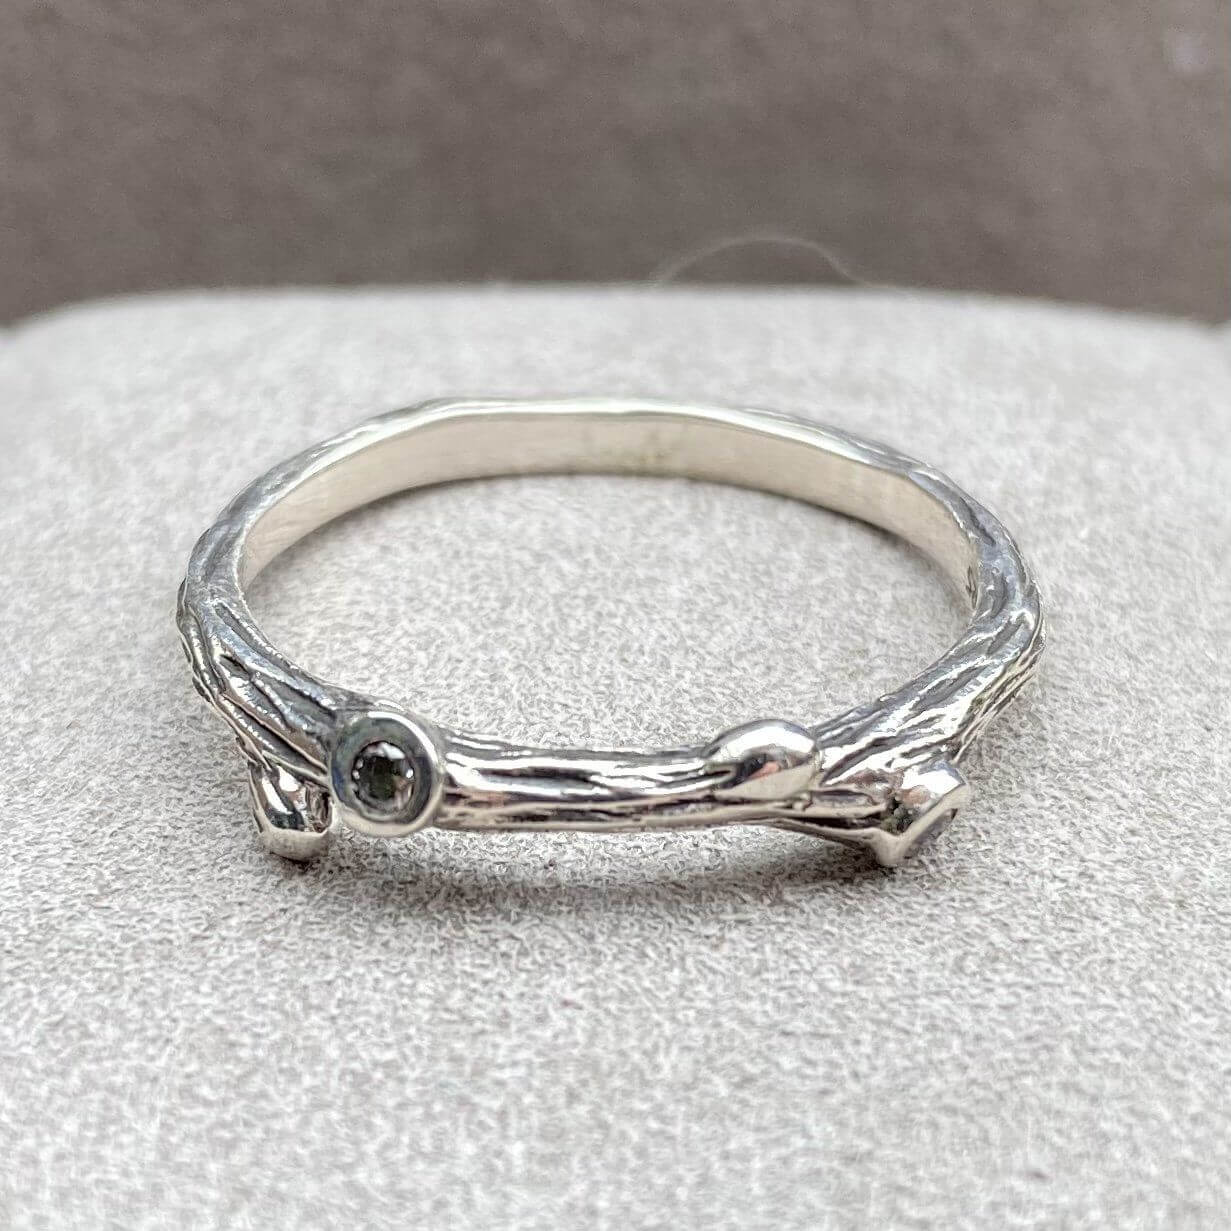 Oxidised Sterling Silver Branch Ring with Zirconia Accents - Twelve Silver Trees